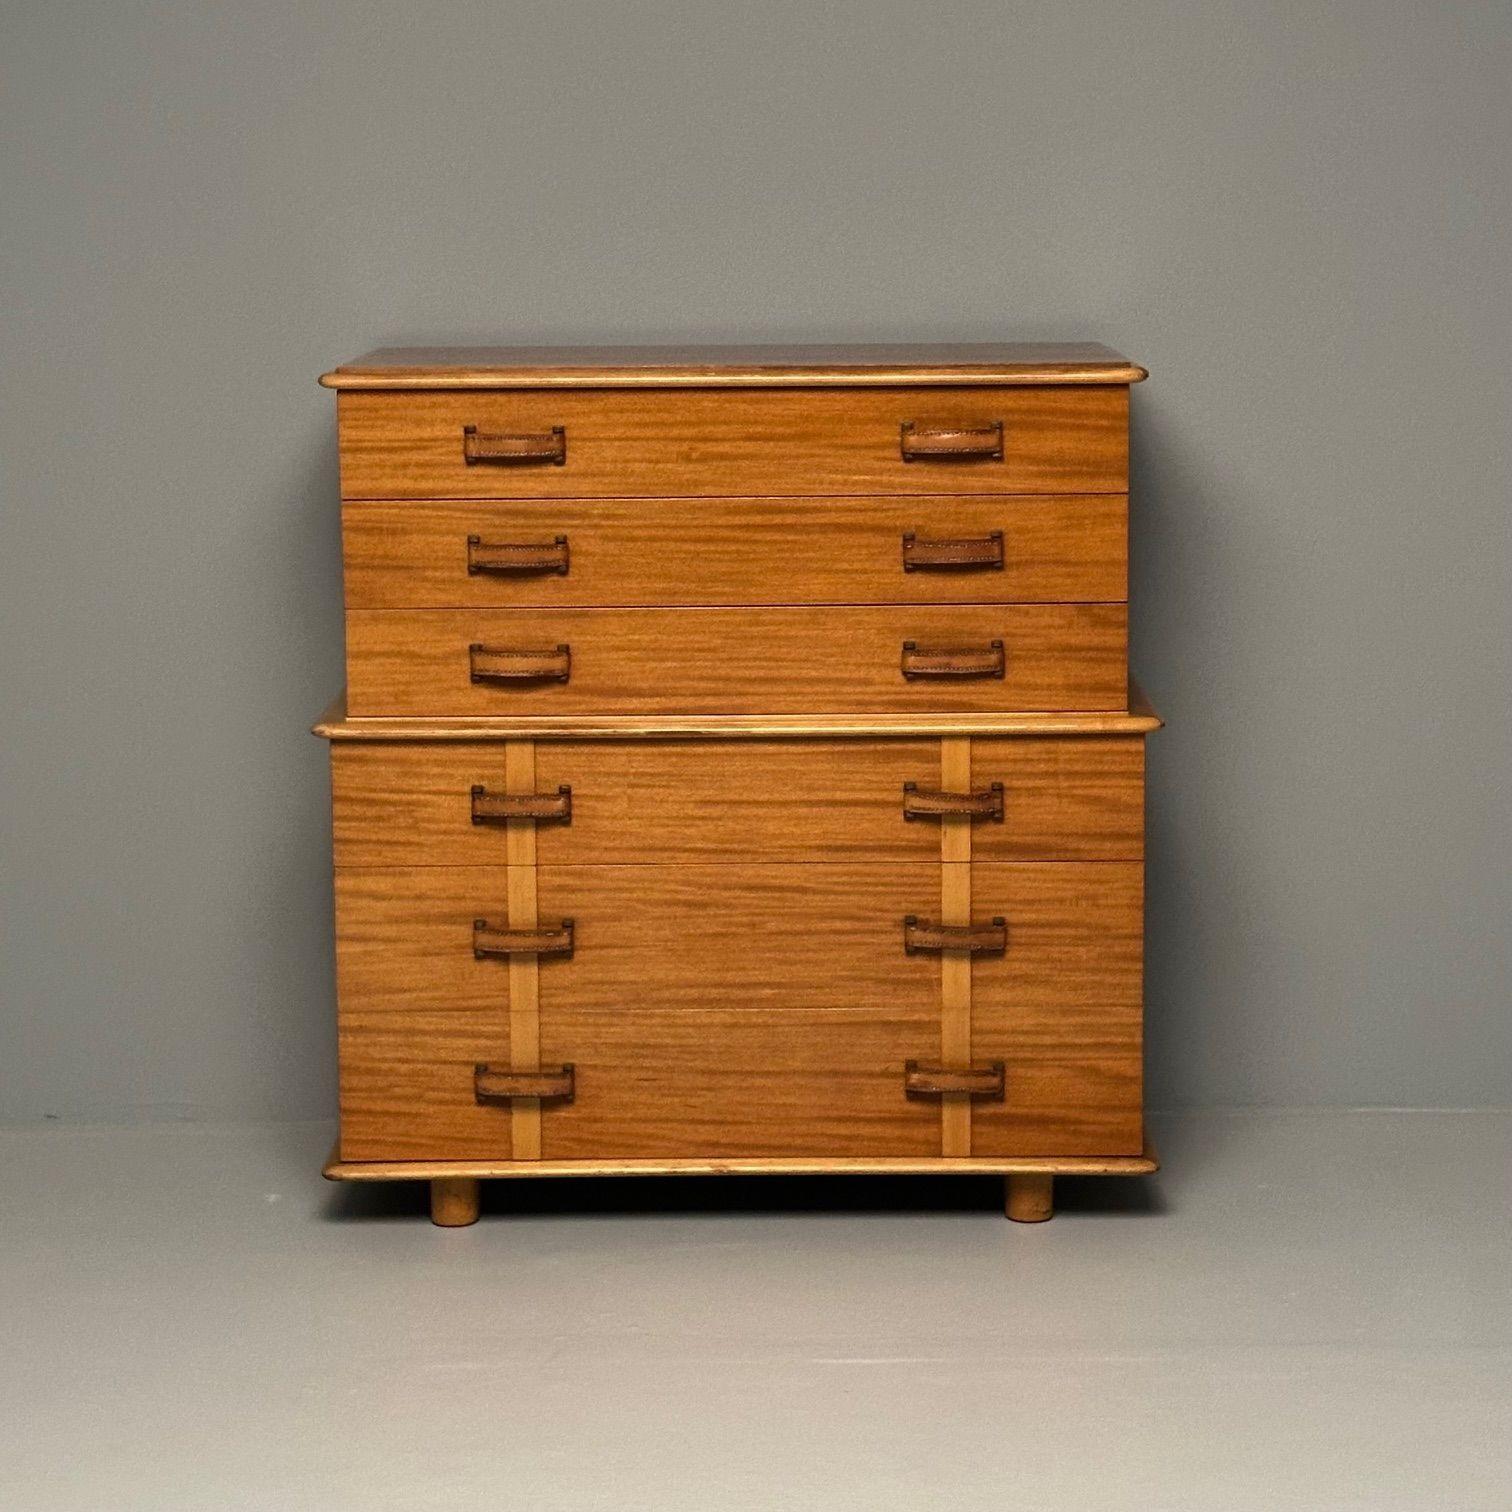 Mid-Century Modern Paul Frankl / John Stuart Highboy, Chest, Bedroom Set 1950s

Paul Frankl for Johnson Furniture Co. and retailed by John Stuart. Branded Johnson Furniture Co. and labeled John Stuart to drawer interior. Stamped with manufacturer's